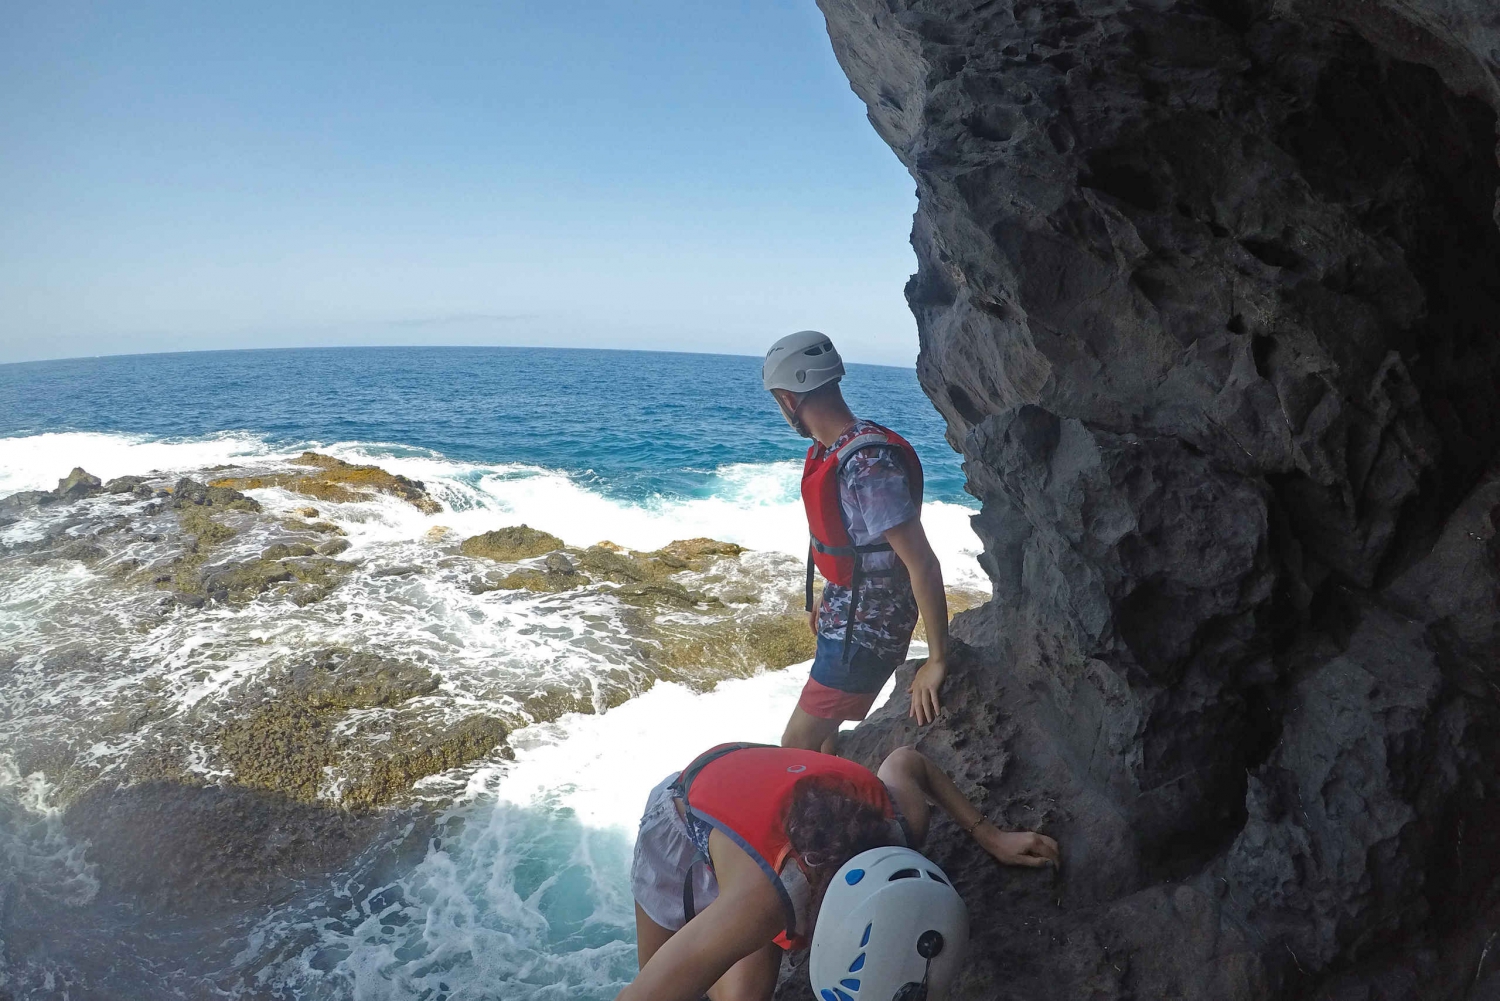 3-Hour Coasteering, Cliff Jumping and Snorkelling